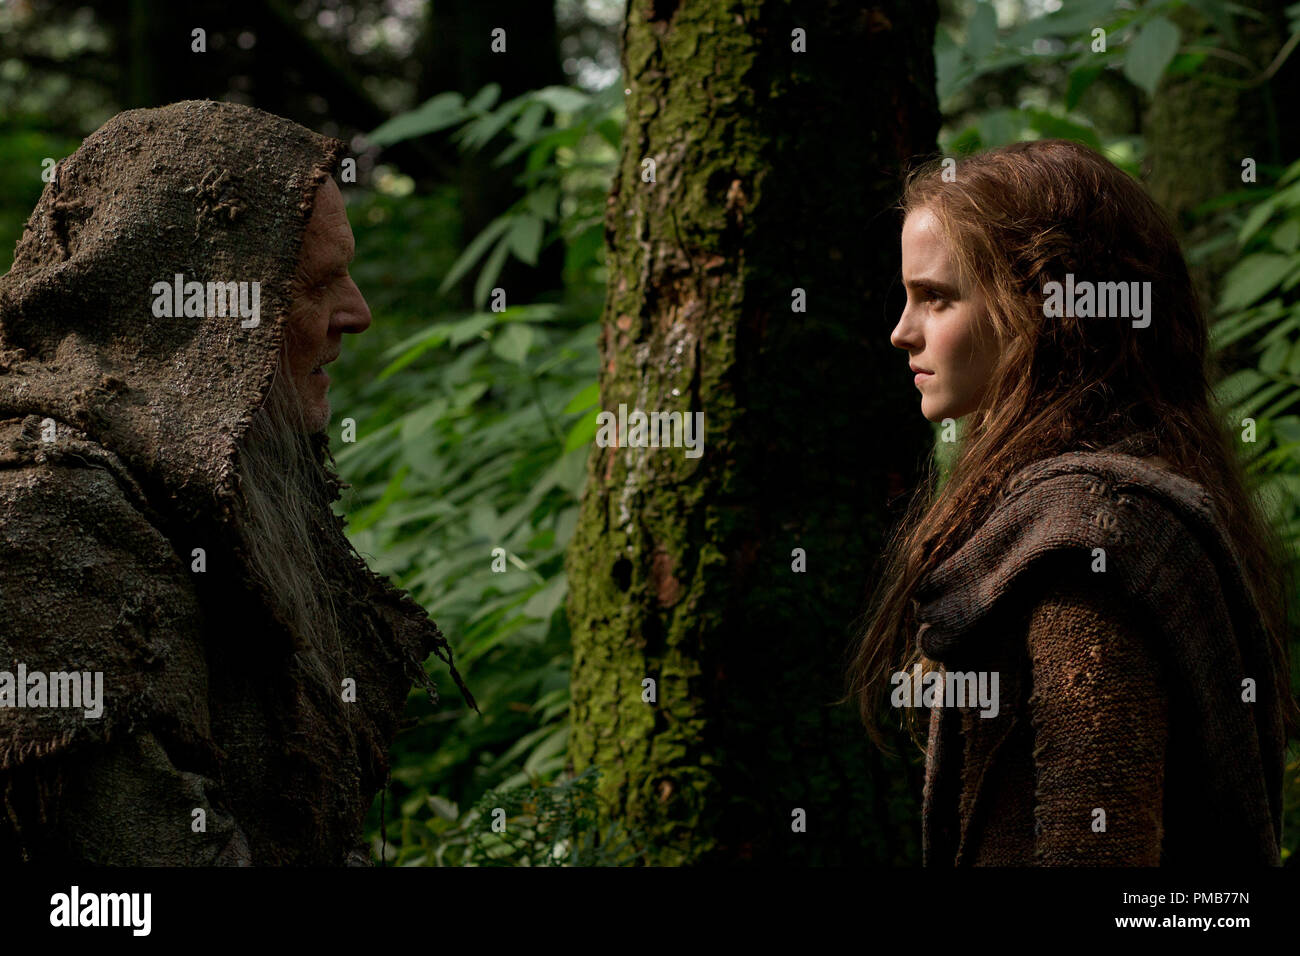 (Left to right) Anthony Hopkins is Methuselah and Emma Watson is Ila in NOAH, from Paramount Pictures and Regency Enterprises. N-14098 Stock Photo